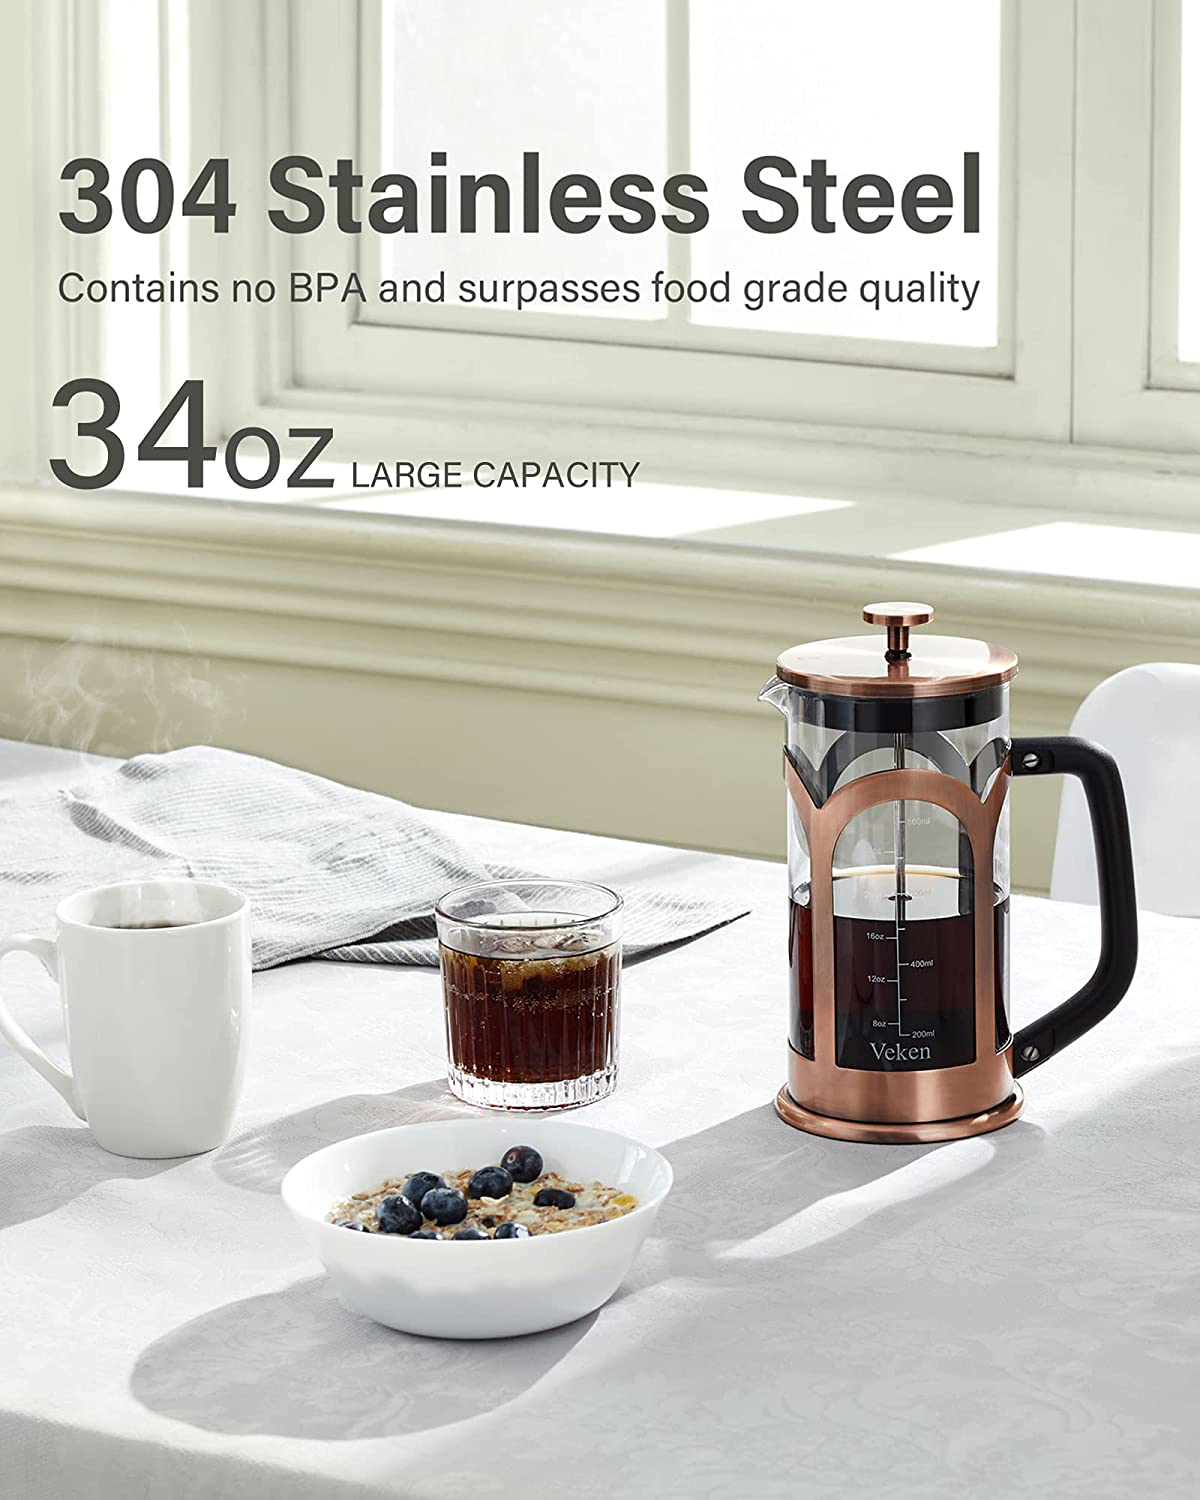 Veken French Press Coffee & Tea Maker, 304 Stainless Steel Heat Resistant Borosilicate Glass Coffee Press with 4 Filter Screens, Durable Easy Clean 100% BPA Free, 21oz, Copper